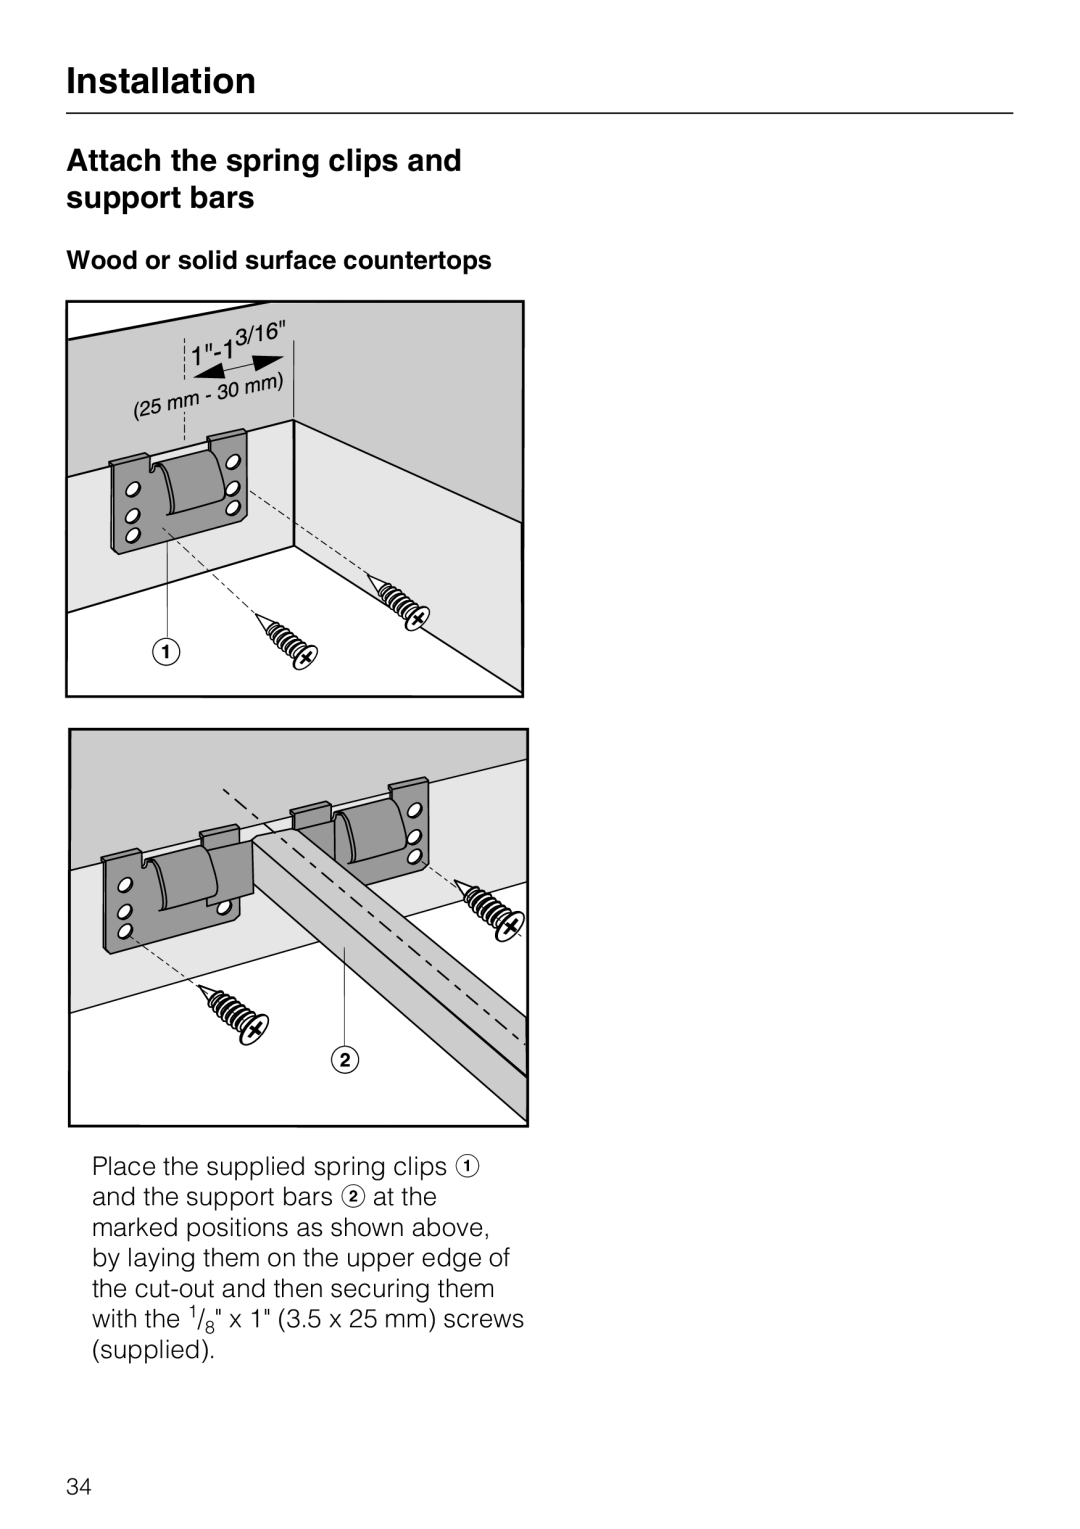 Miele CS 1122, CS1112 installation instructions Attach the spring clips and support bars, Wood or solid surface countertops 